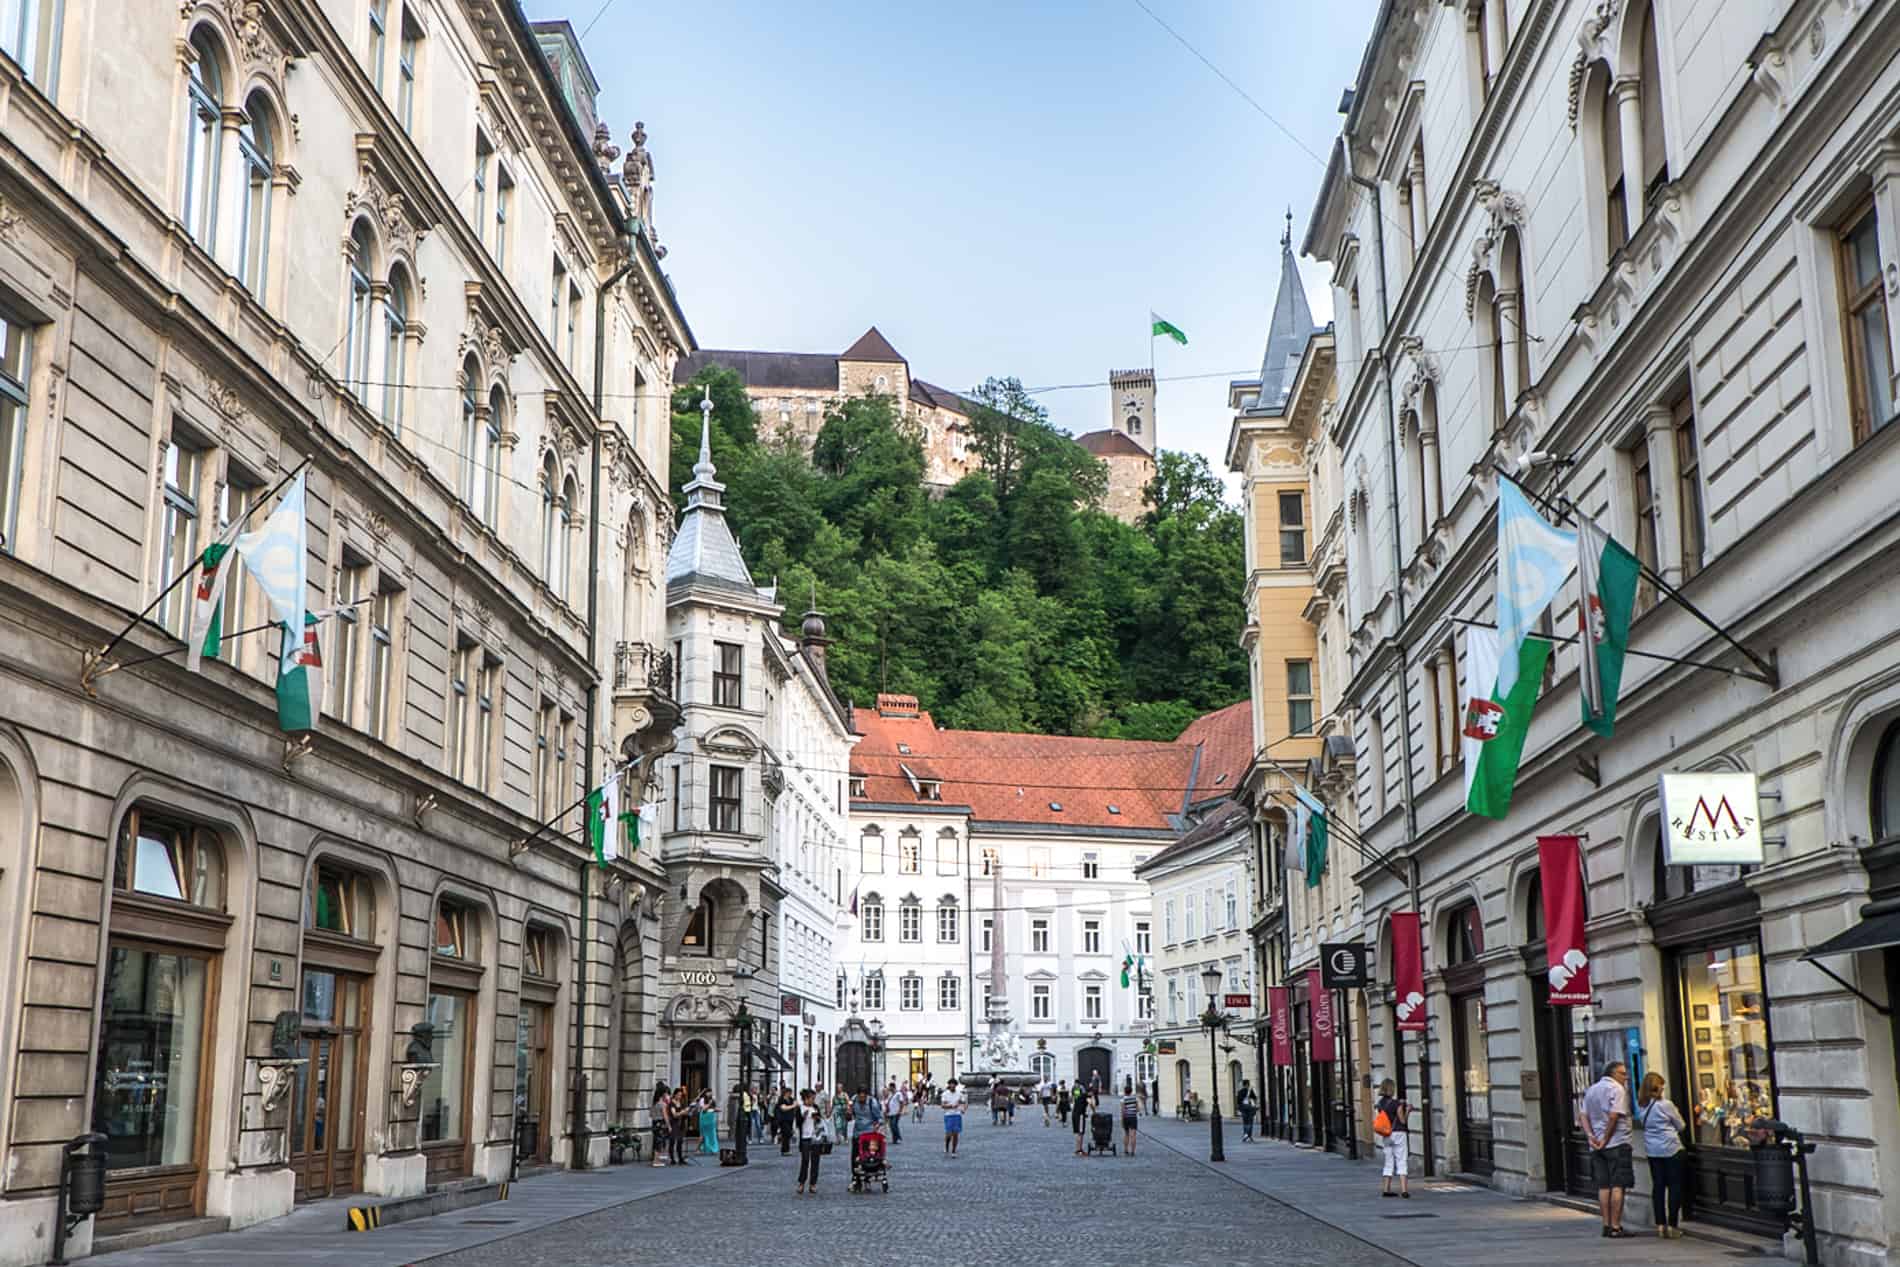 Wide street view to Ljubljana castle on the top of the forested hill.